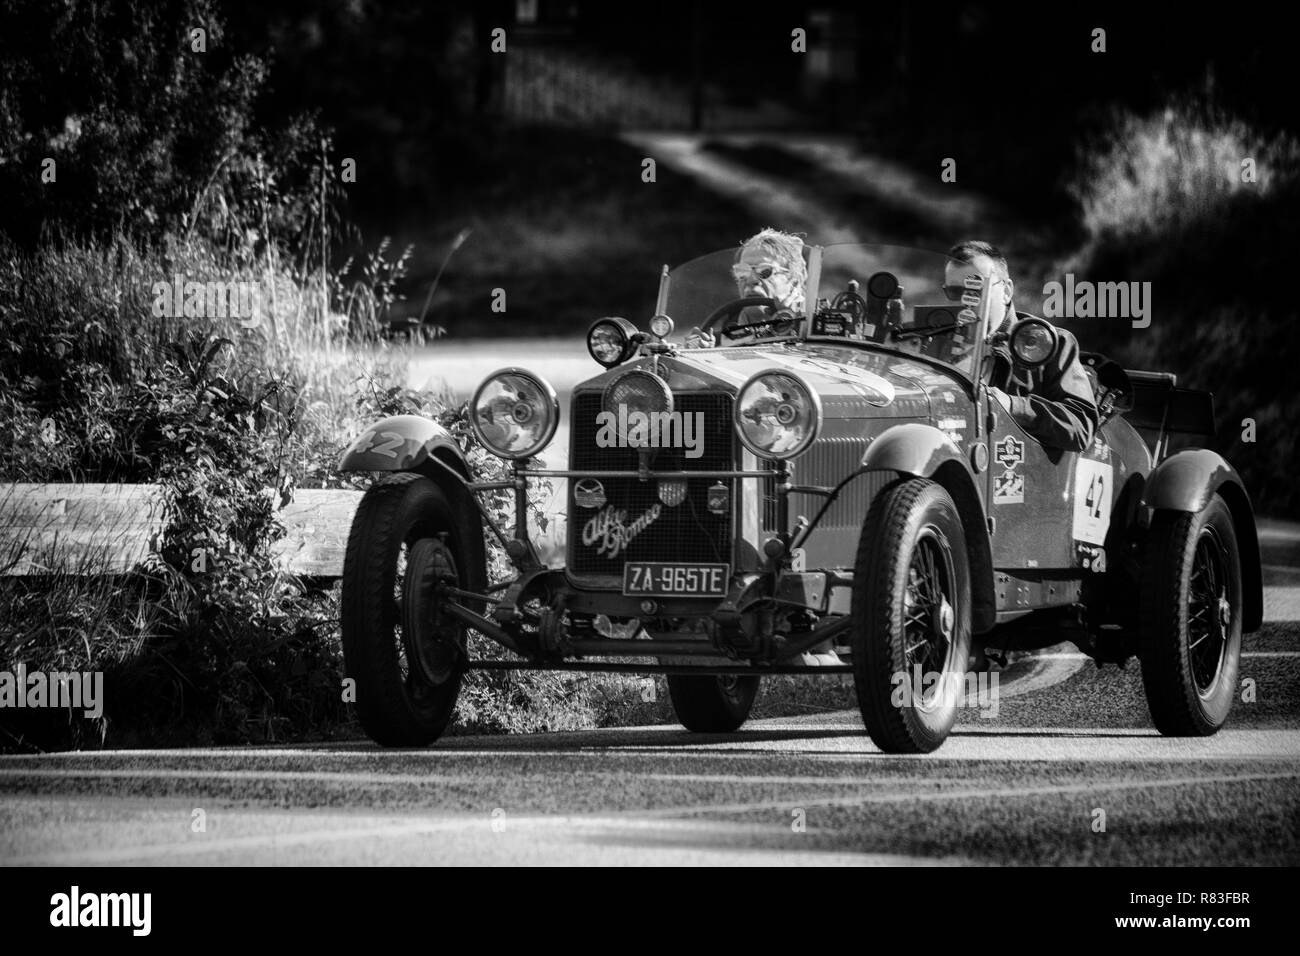 PESARO COLLE SAN BARTOLO , ITALY - MAY 17 - 2018 : ALFA ROMEO 6C 1500 SUPER SPORT MM 1928 on an old racing car in rally Mille Miglia 2018 the famous i Stock Photo